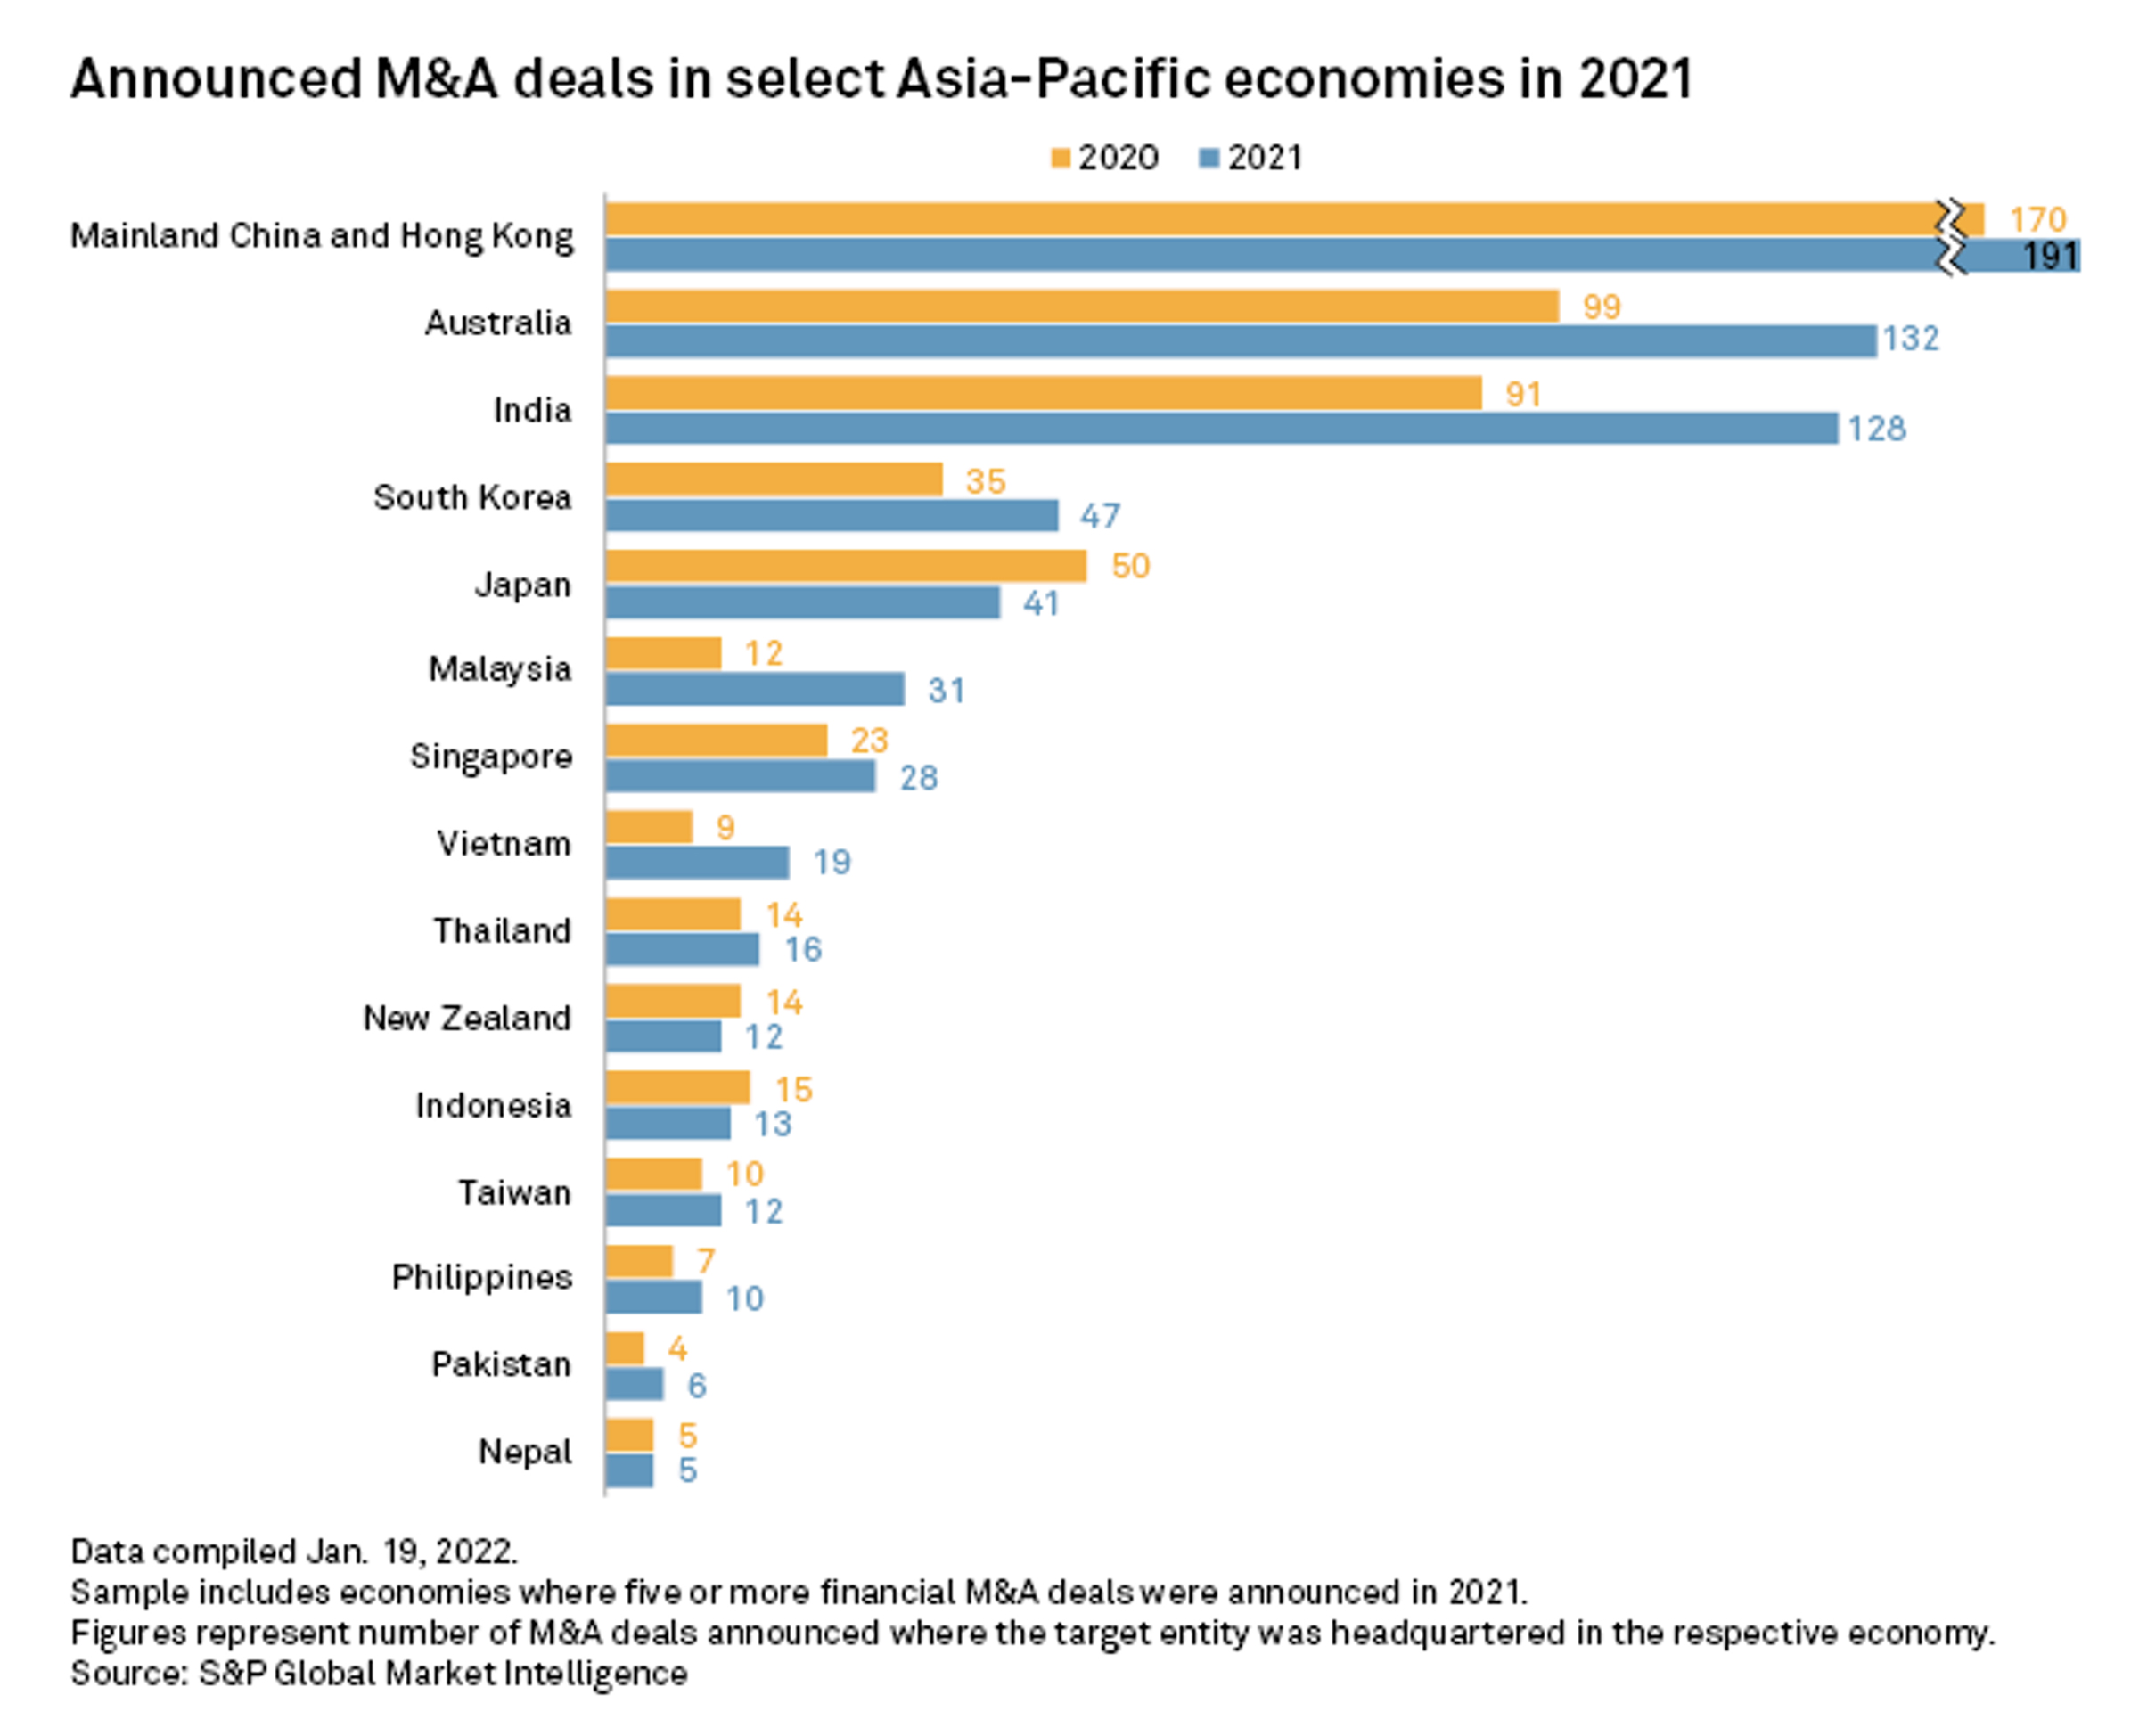 M&A Activity in the Asia-Pacific Region: Past, Present and a Look Forward